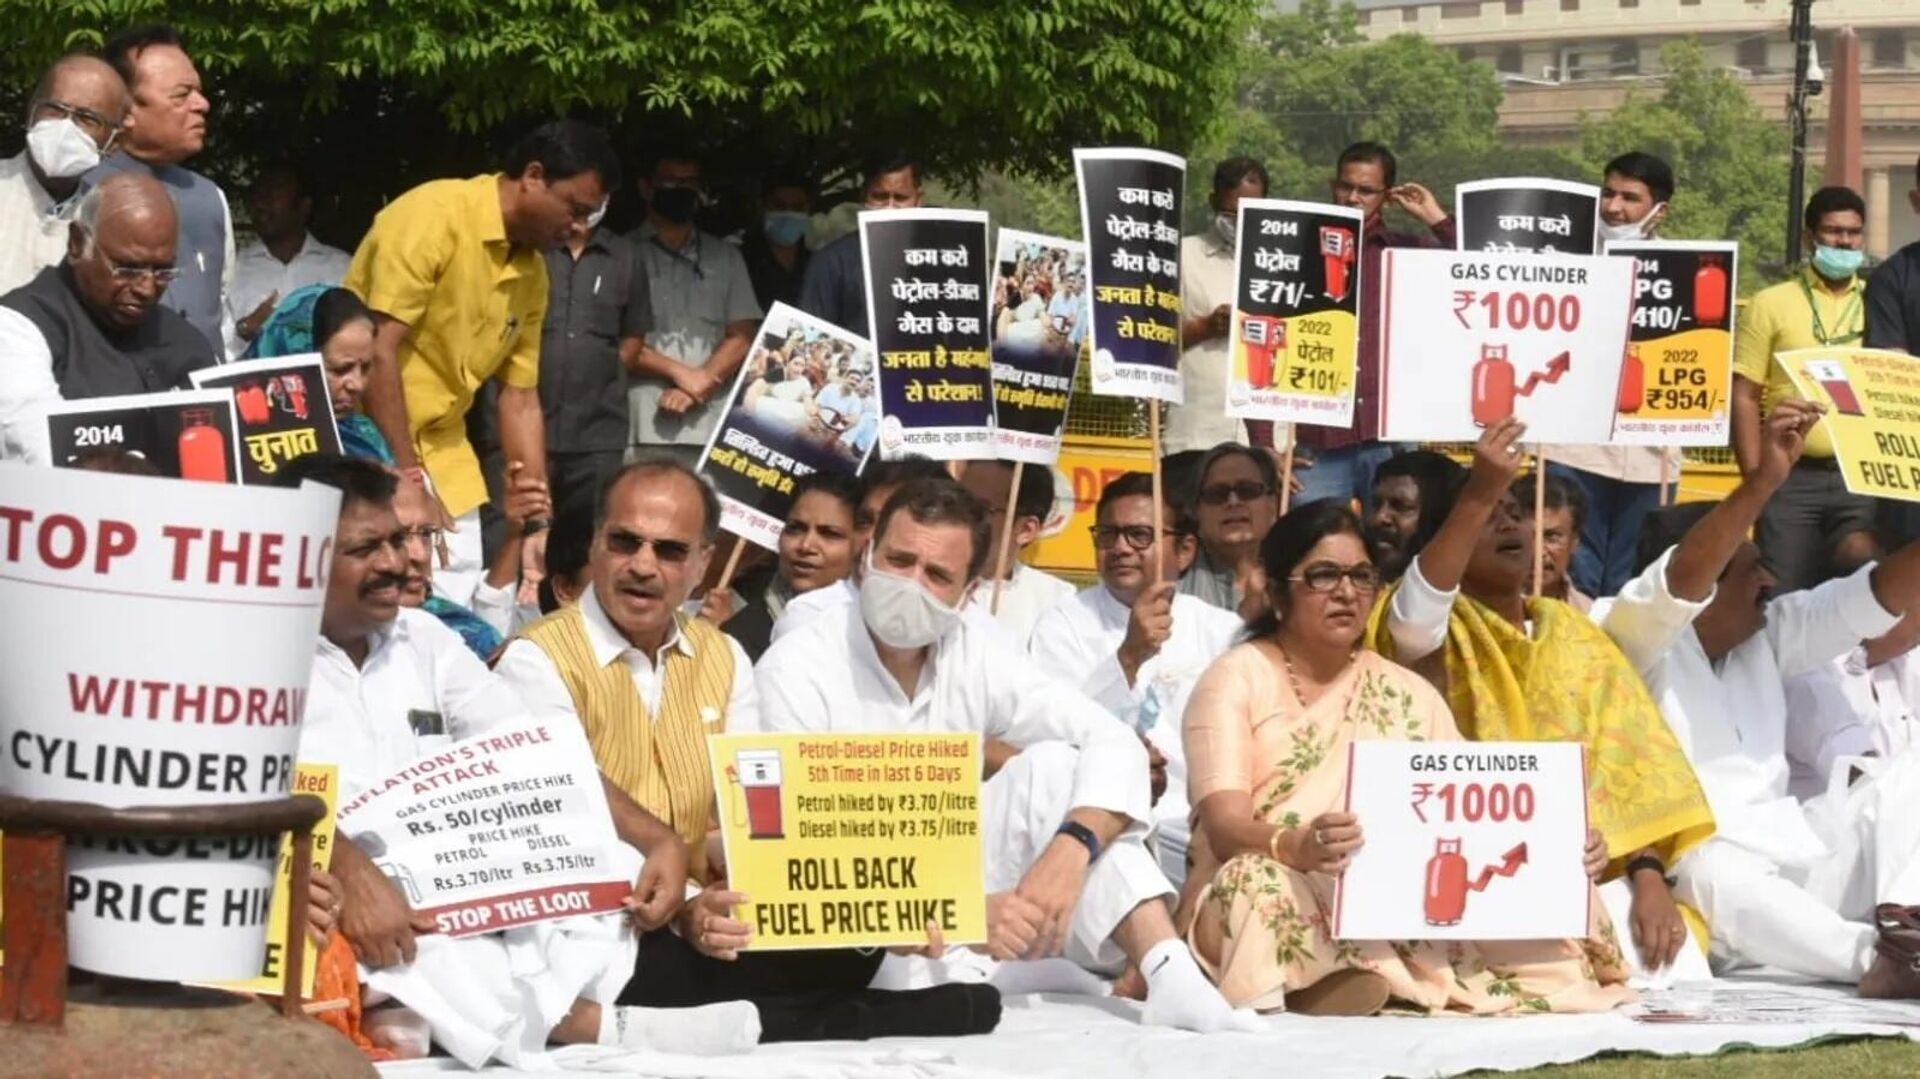 Congress MPs protesting against the hike in diesel and cooking gas prices at Vijay Chowk in New Delhi on Thursday - Sputnik International, 1920, 31.03.2022